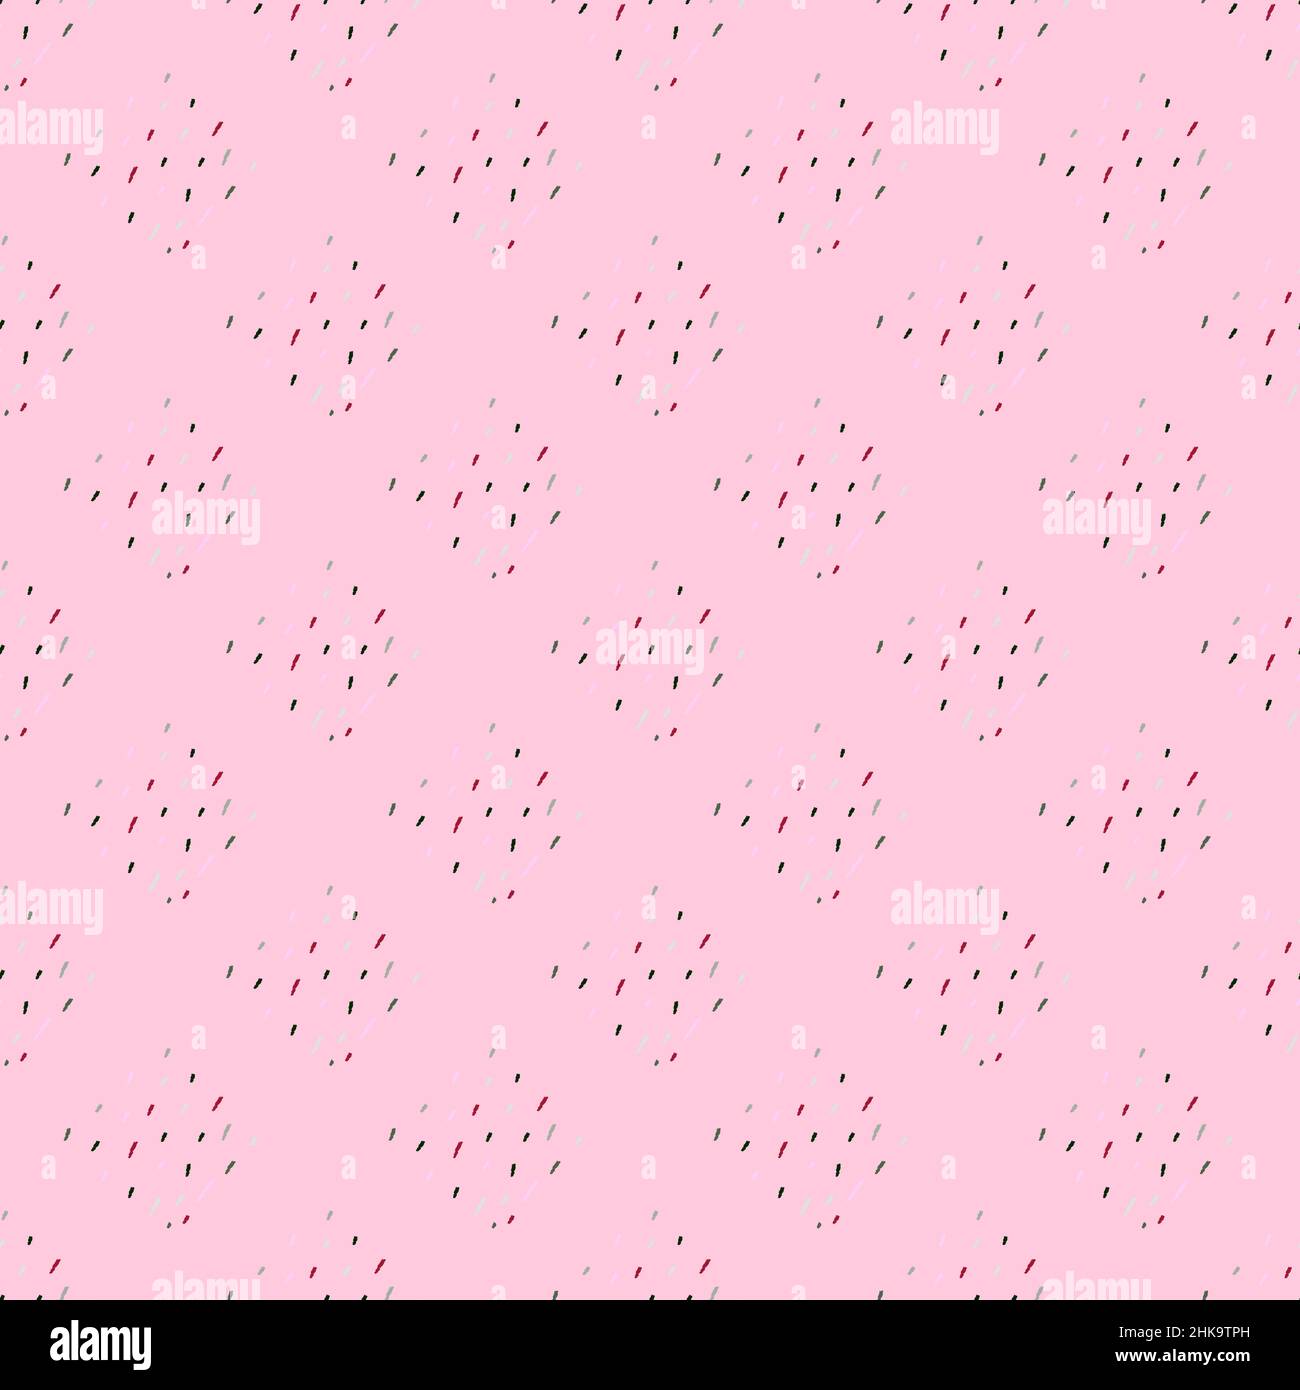 Vintage dashes seamless pattern. Minimalist decoration background. Repeated texture in doodle style for fabric, wrapping paper, wallpaper, tissue. Vec Stock Vector